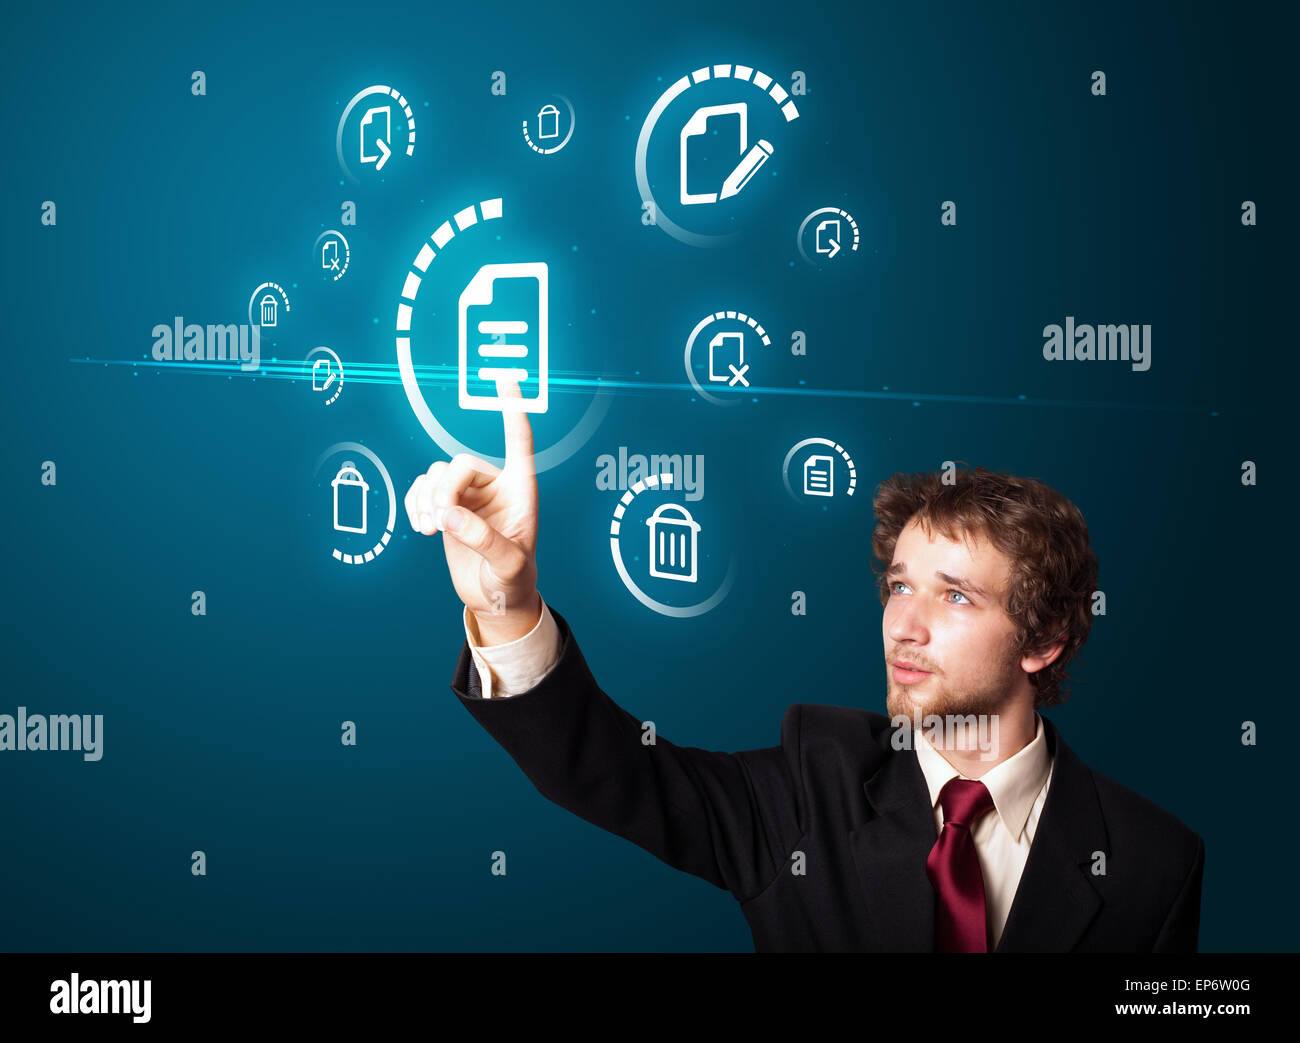 Businessman pressing modern business type of buttons Stock Photo